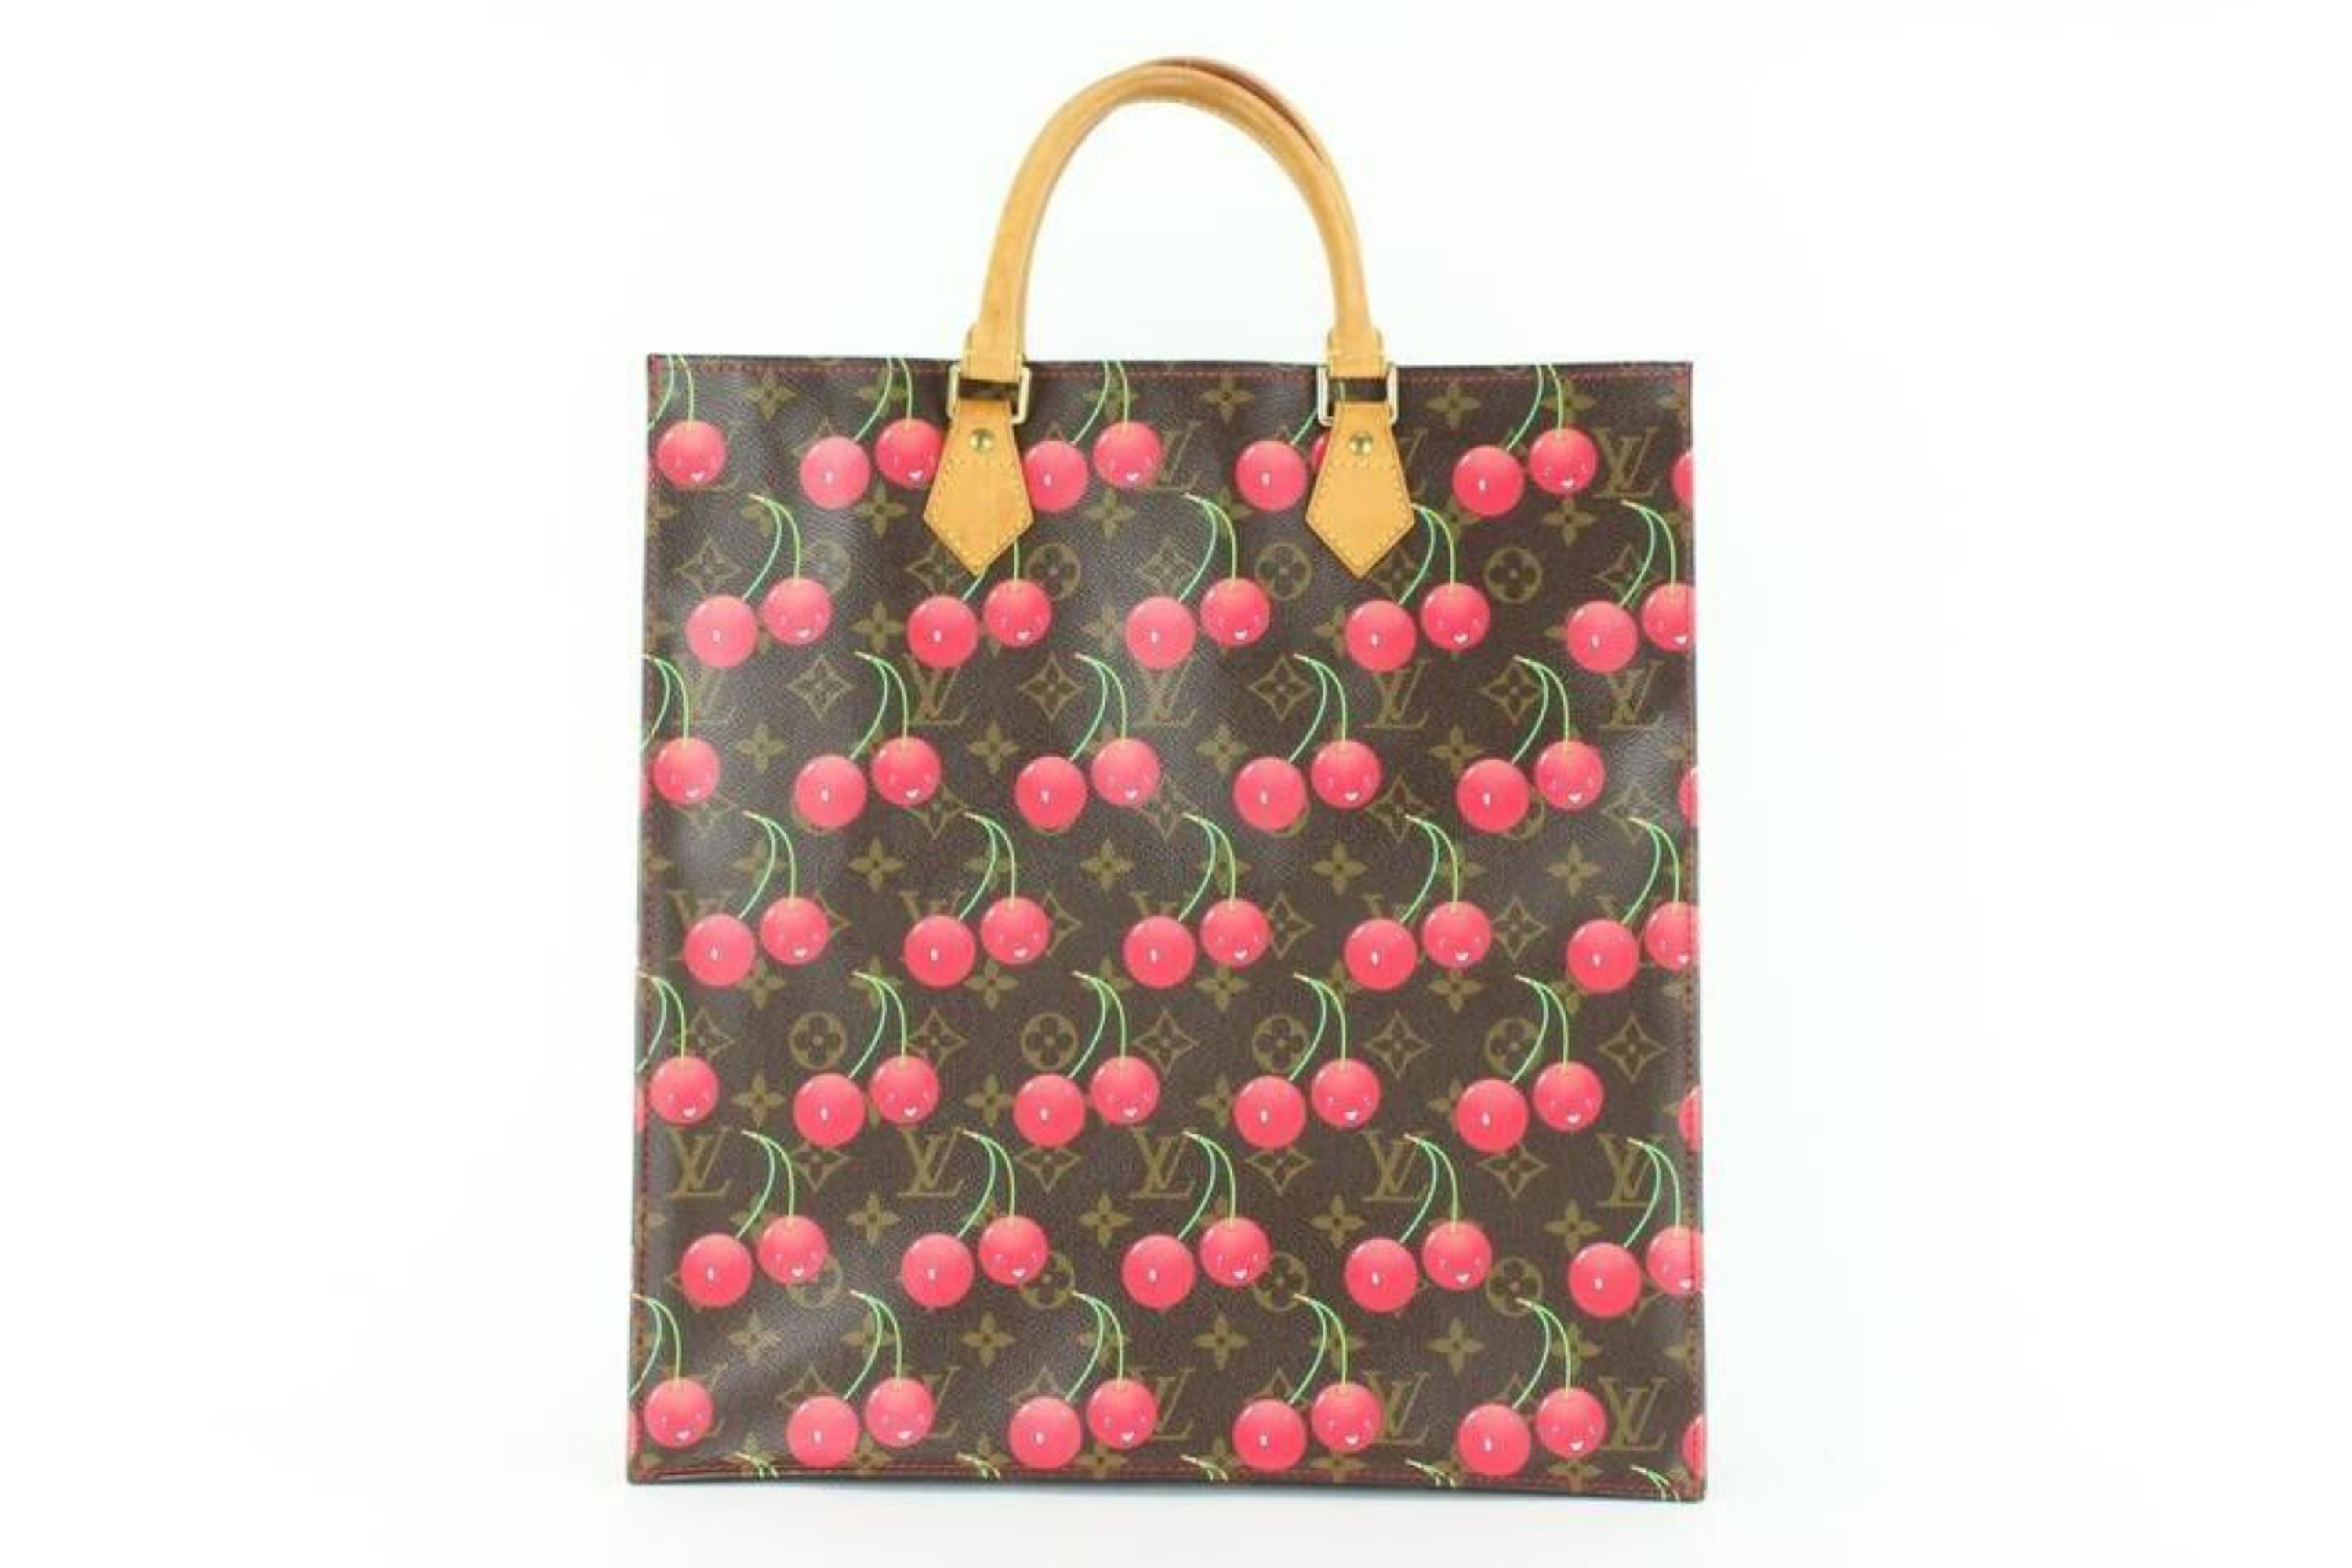 Louis Vuitton Takashi Murakami Monogram Cherries Sac Plat Tote 70L26a In Good Condition In Dix hills, NY